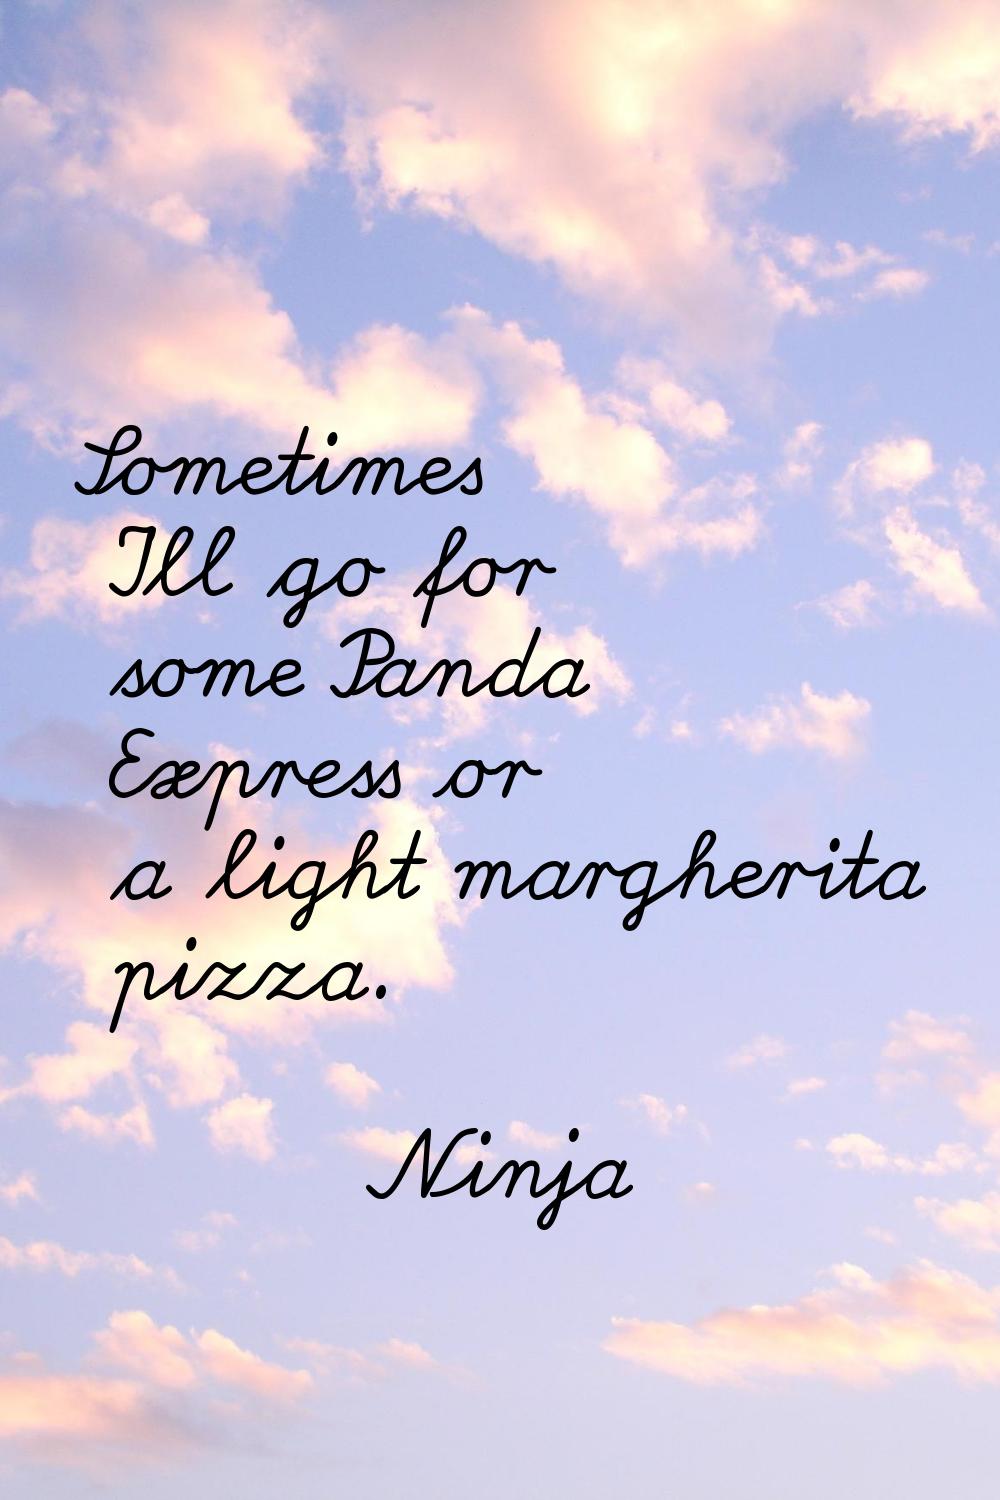 Sometimes I'll go for some Panda Express or a light margherita pizza.